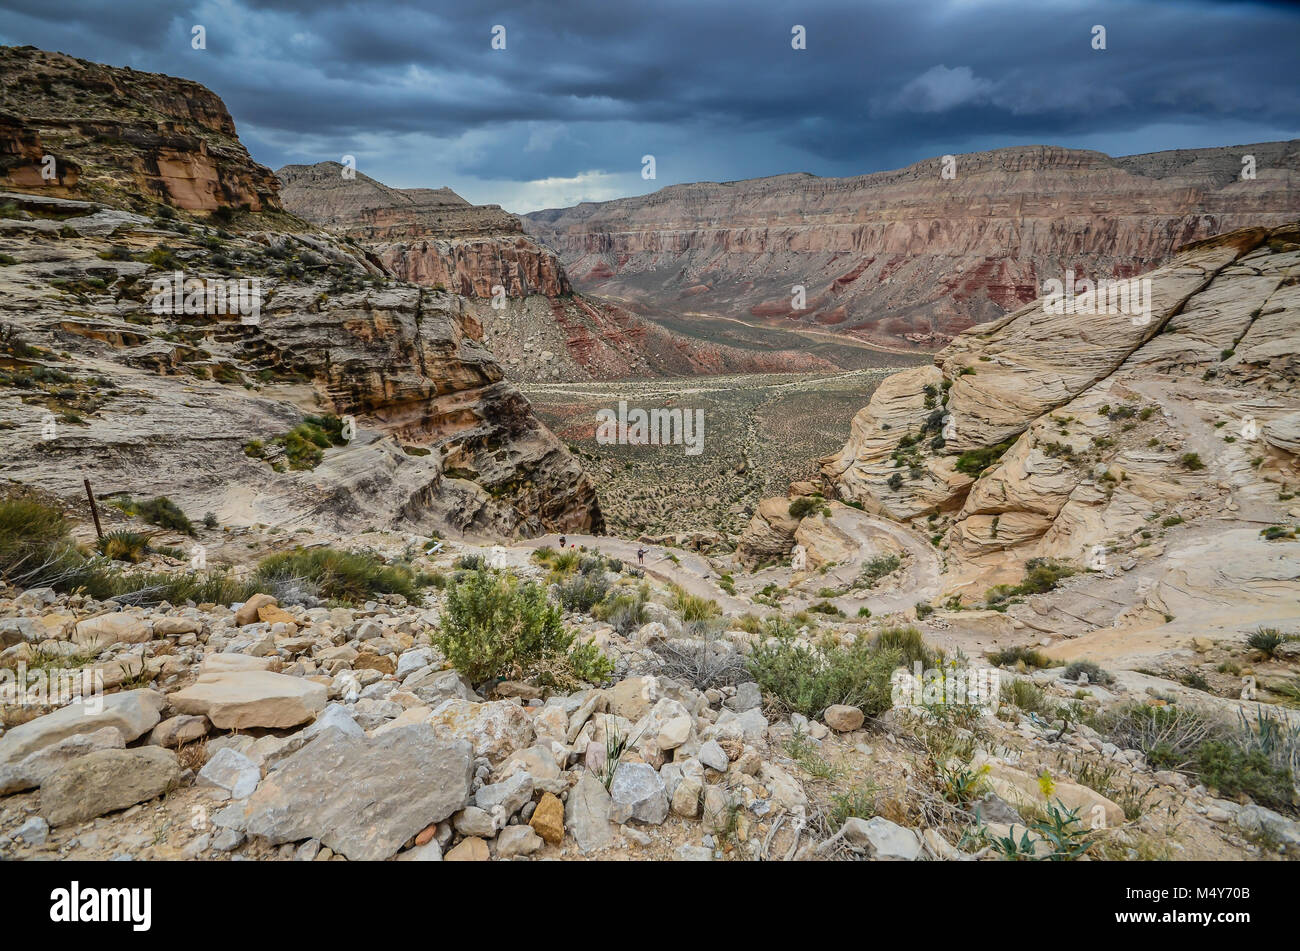 Canyon cliffs on tribal lands of Hualapai people. Stock Photo